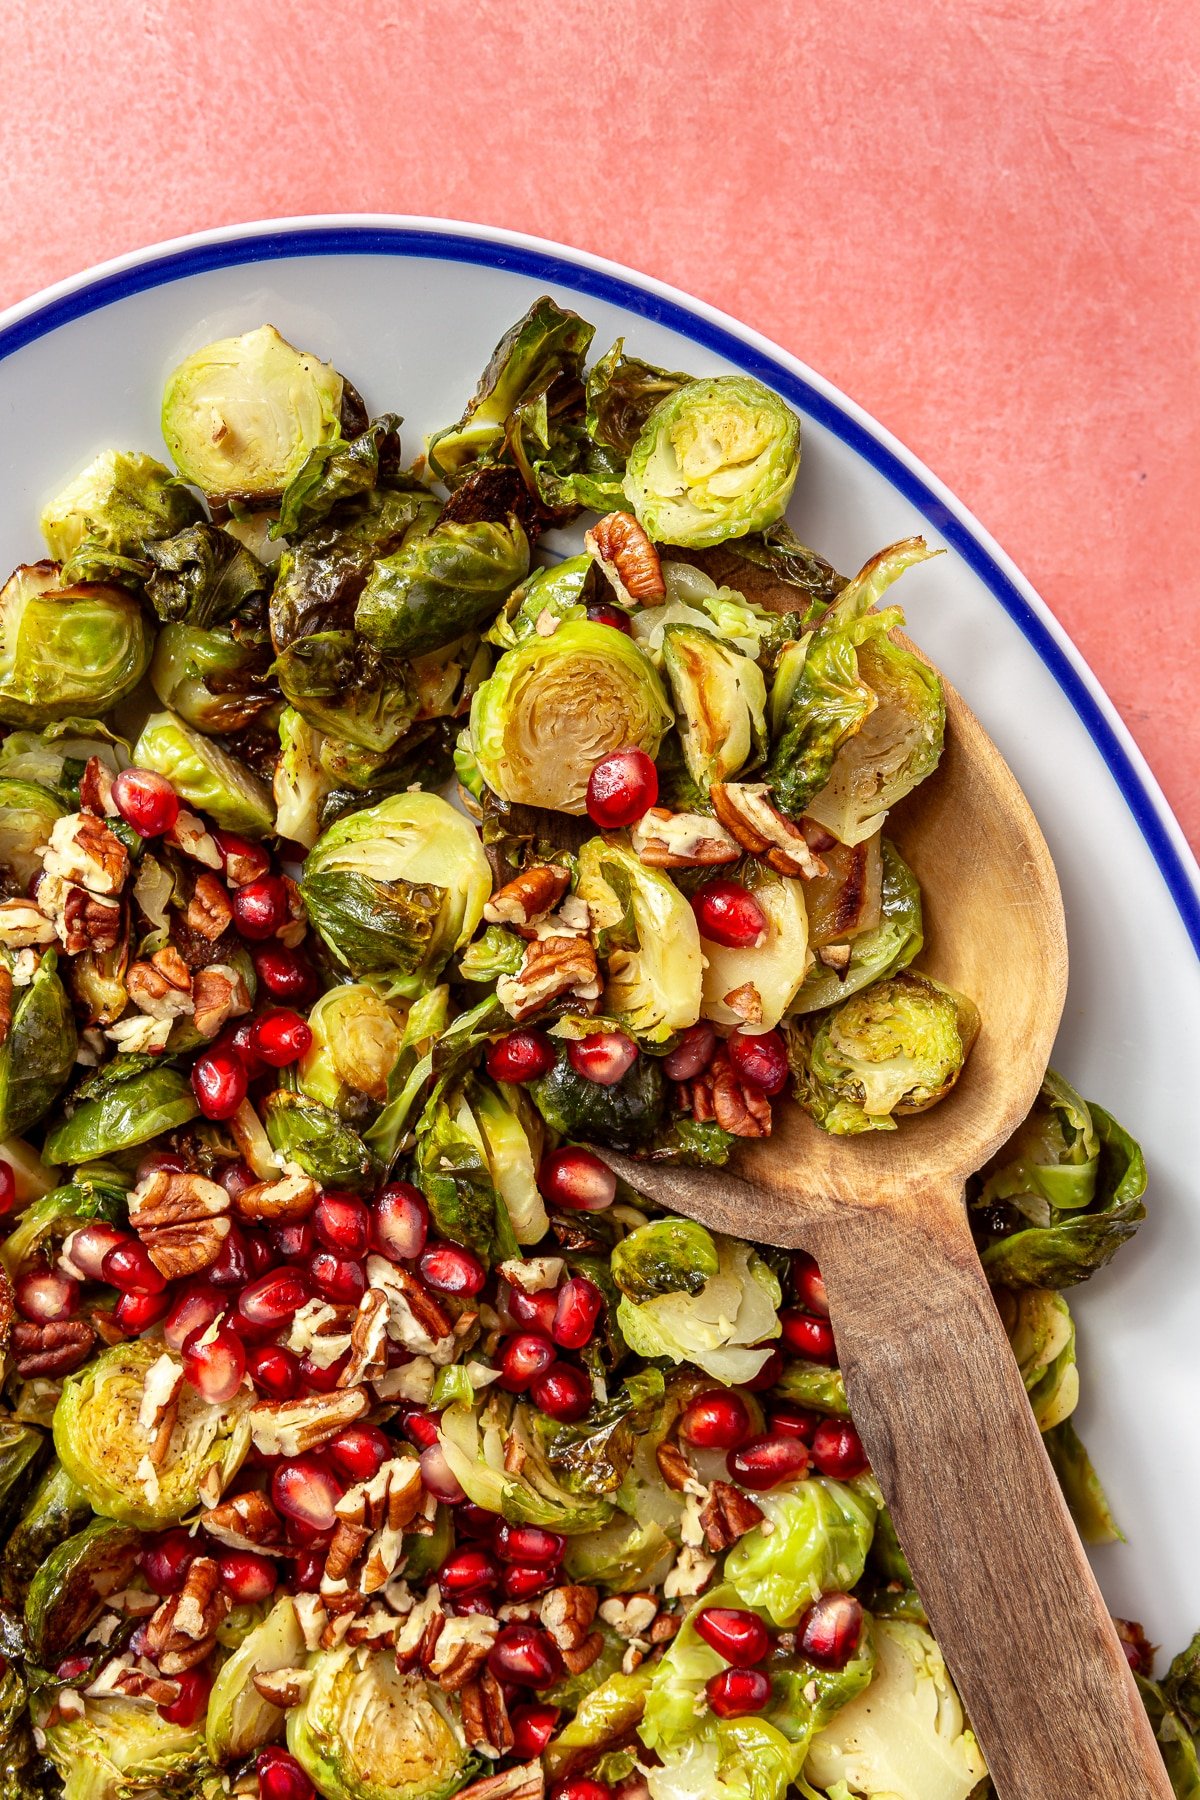 The brussels sprouts have been placed into a white, oval-shaped serving dish with a blue border. Pomegranate seeds and chopped pecans have been added on top. A wooden serving spoon is shown scooping the brussels sprouts.